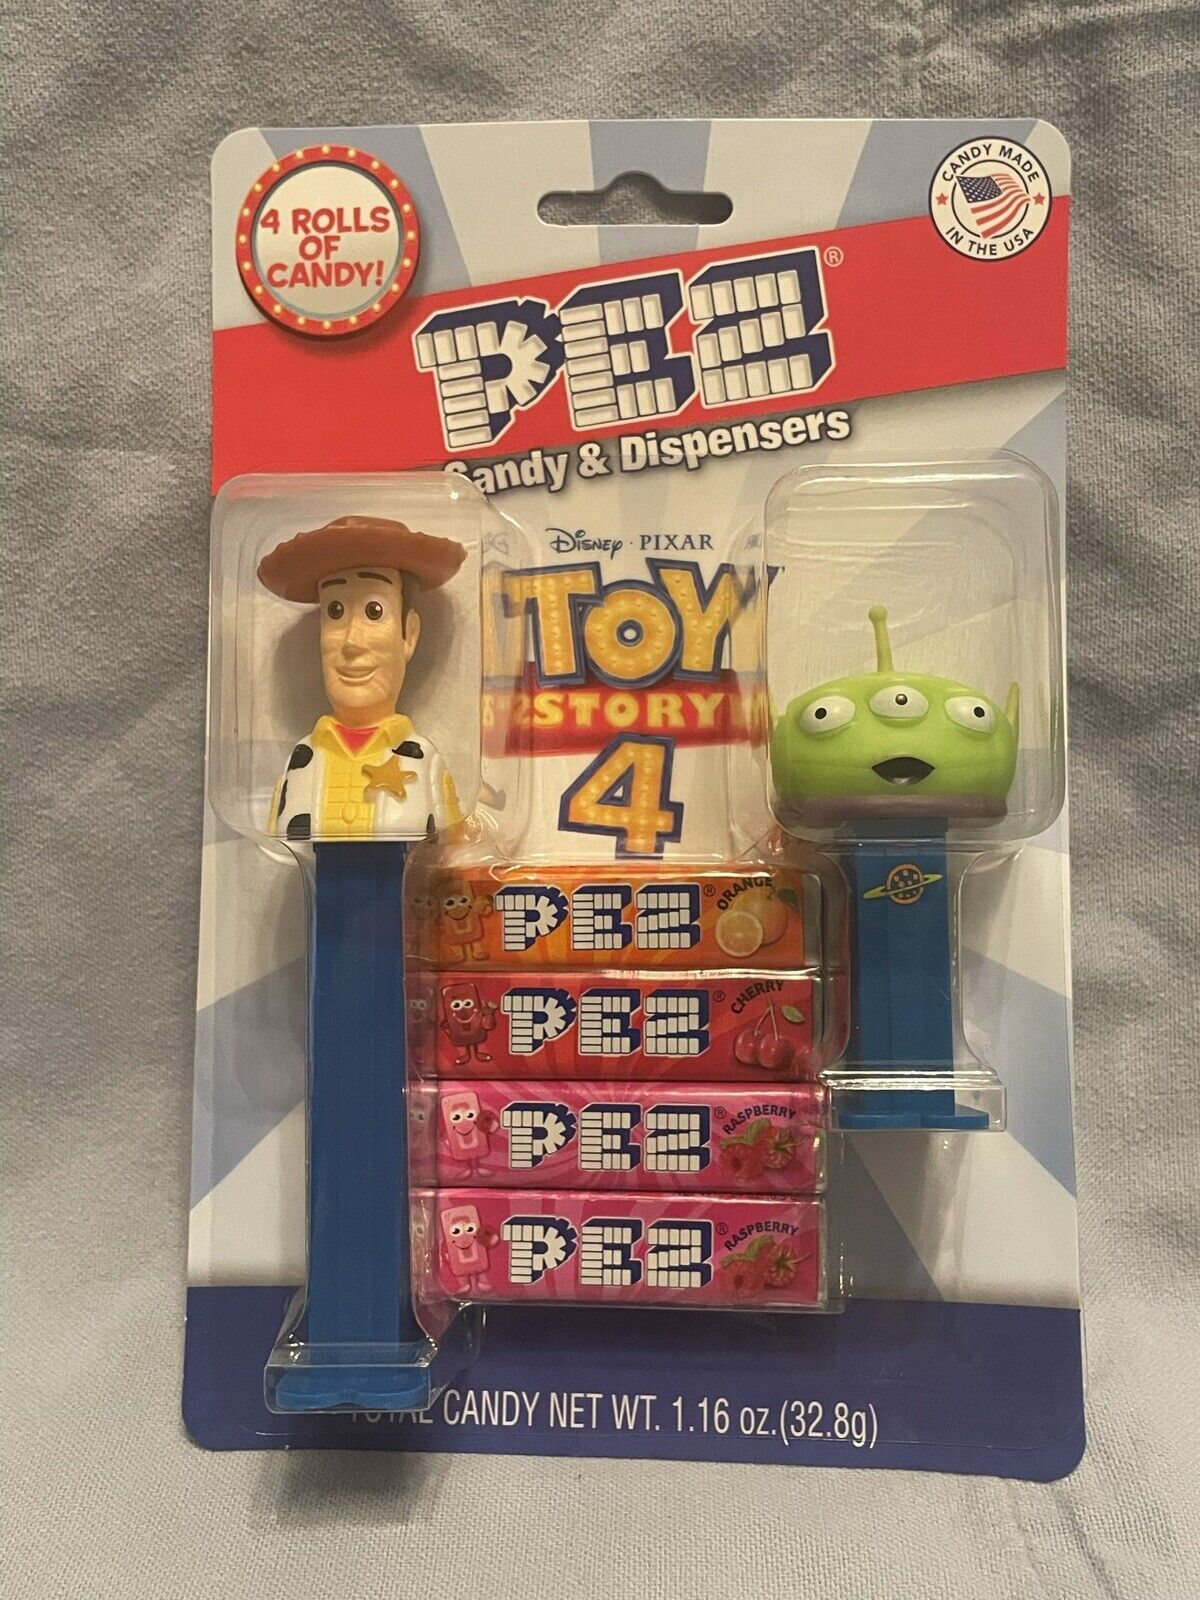 NEW Set of 2 Pez Toy Story Green Alien & Woody - 4 Candy & 2 Dispensers